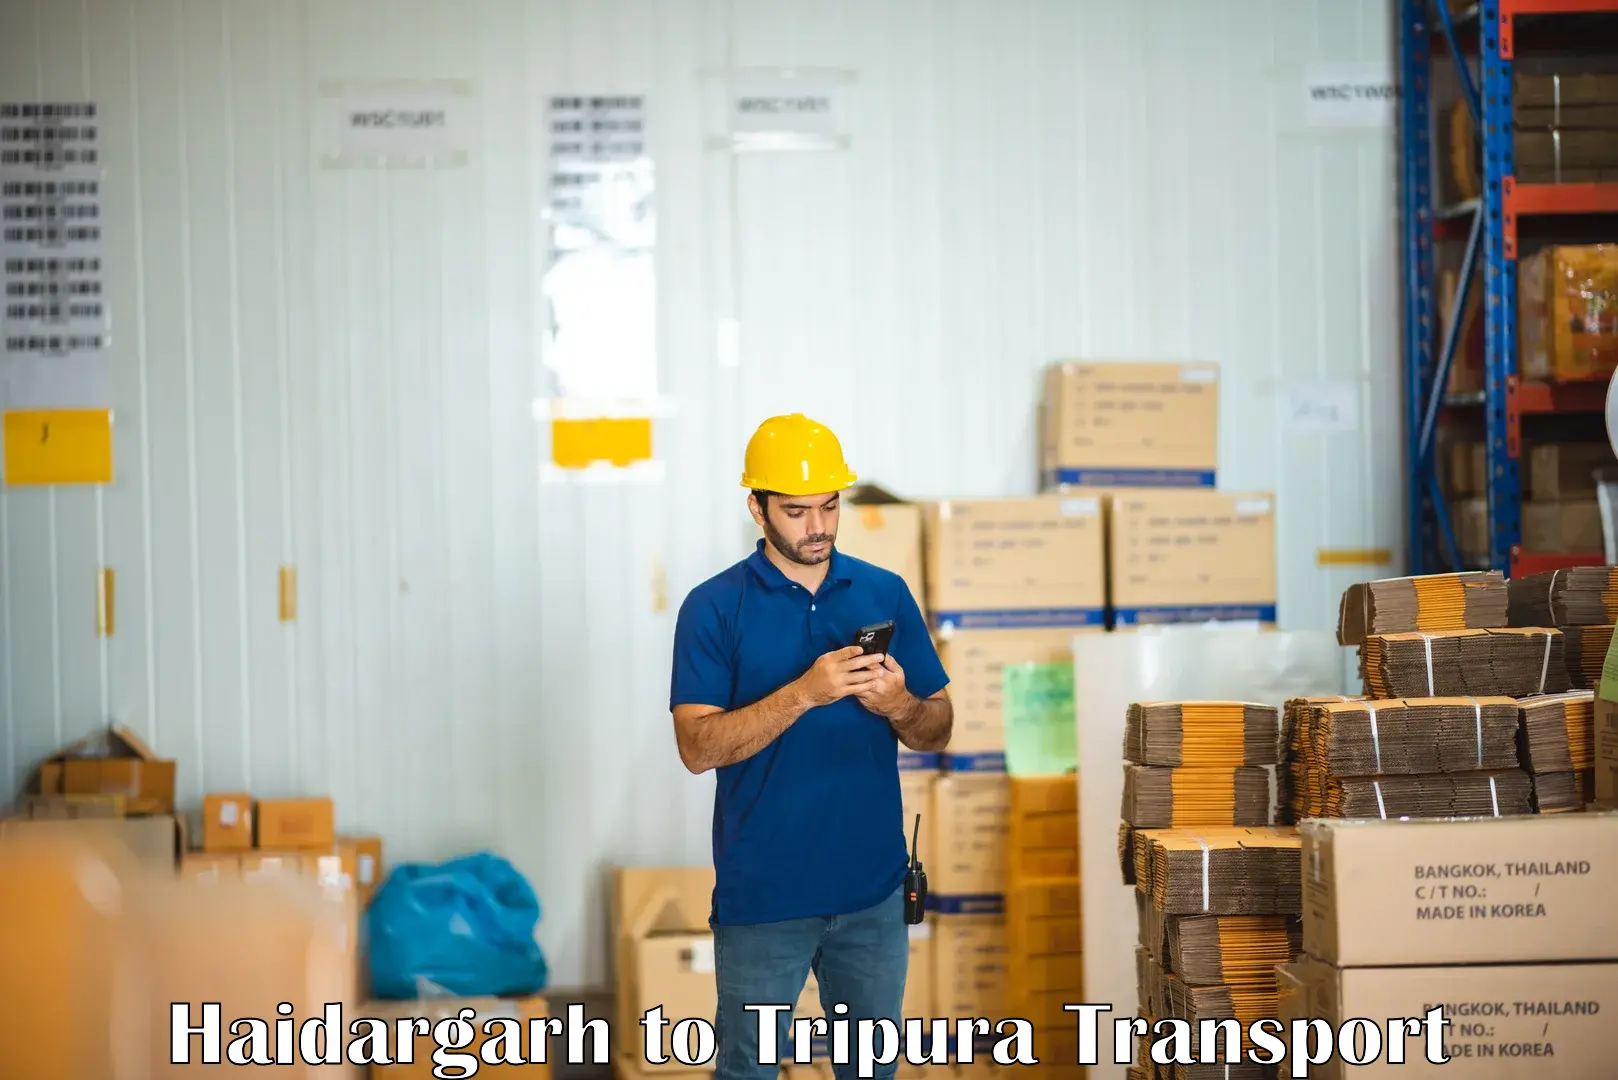 Goods delivery service Haidargarh to Tripura